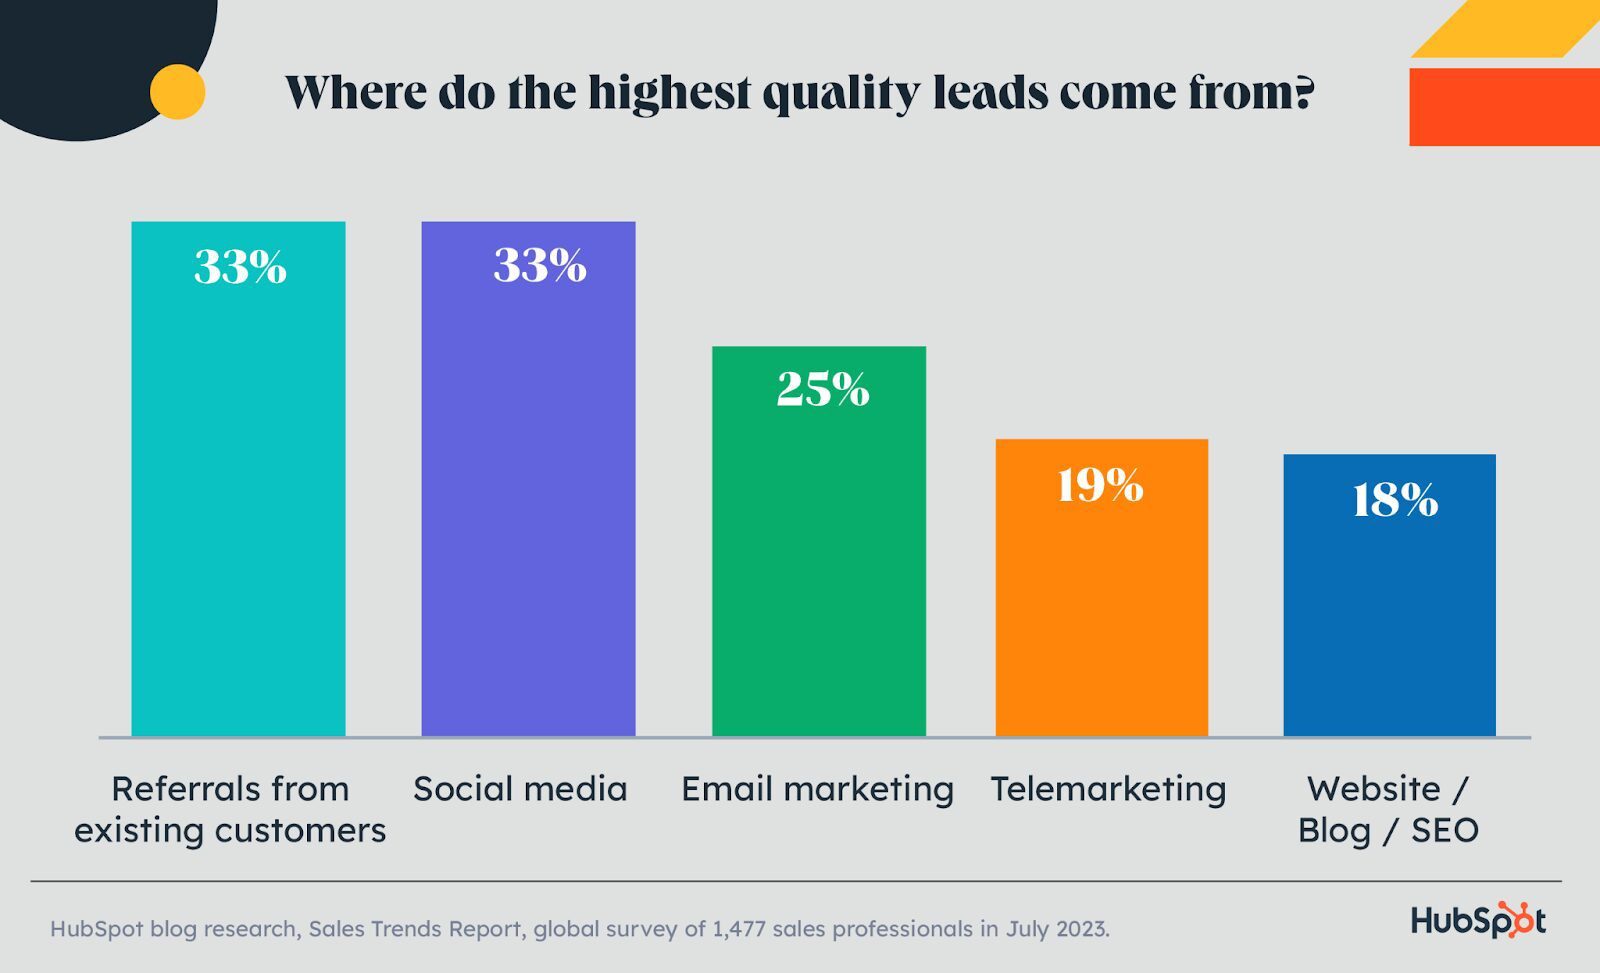 High quality leads come from referrals and social media